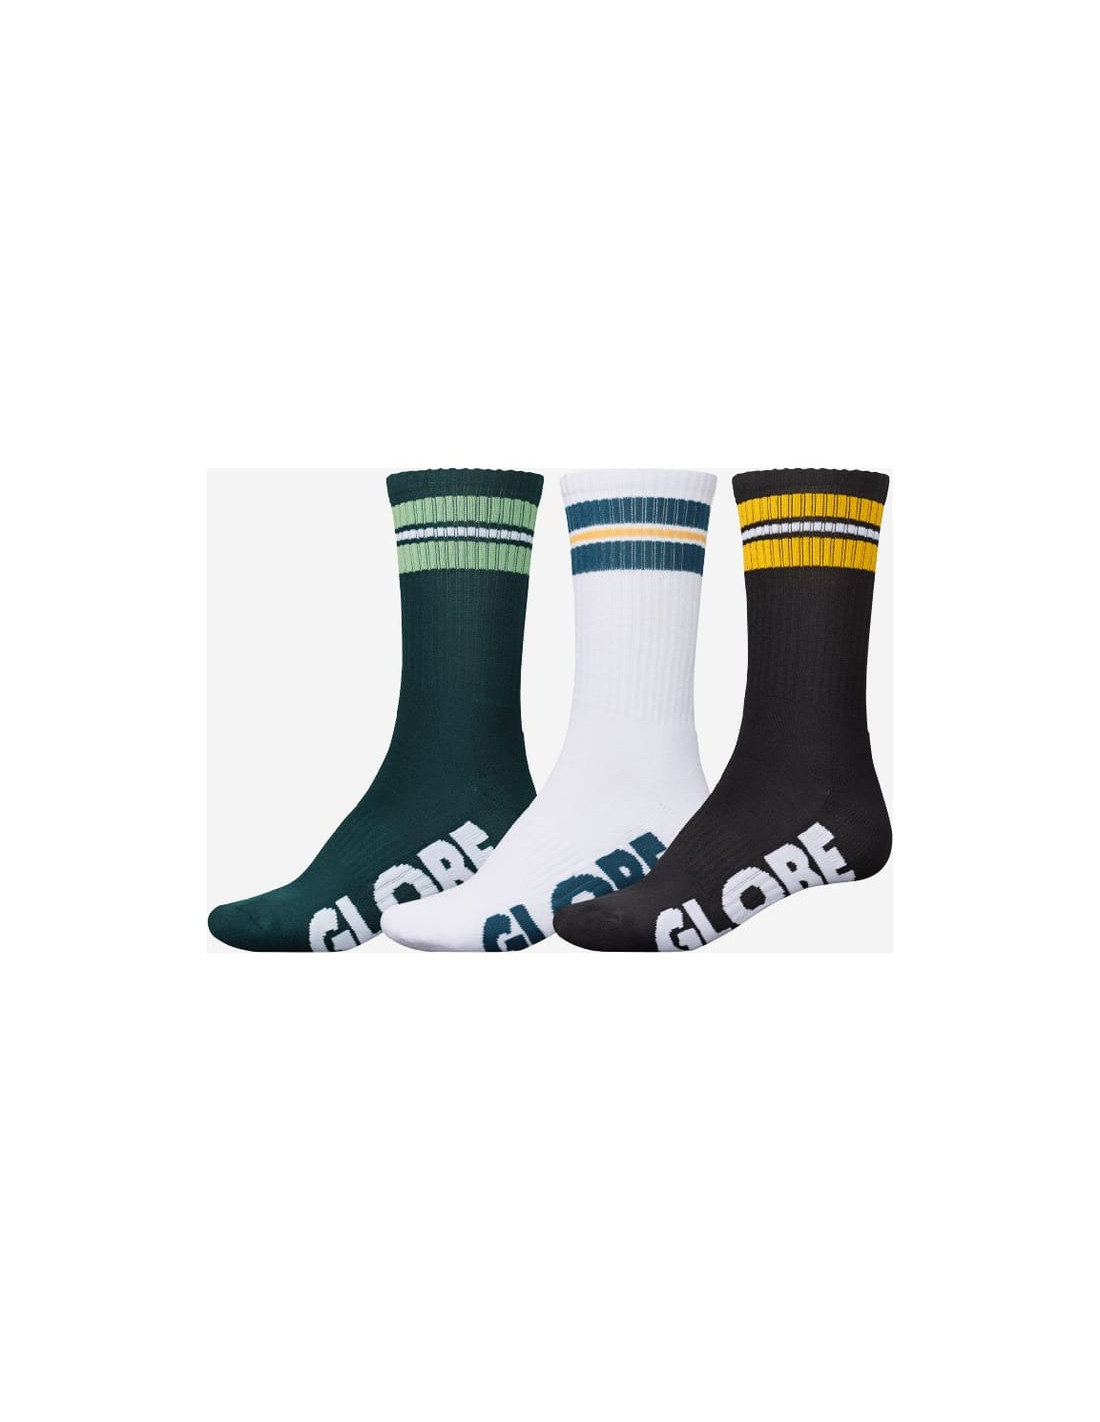 OFF COURSE CREW SOCK 3 PACK